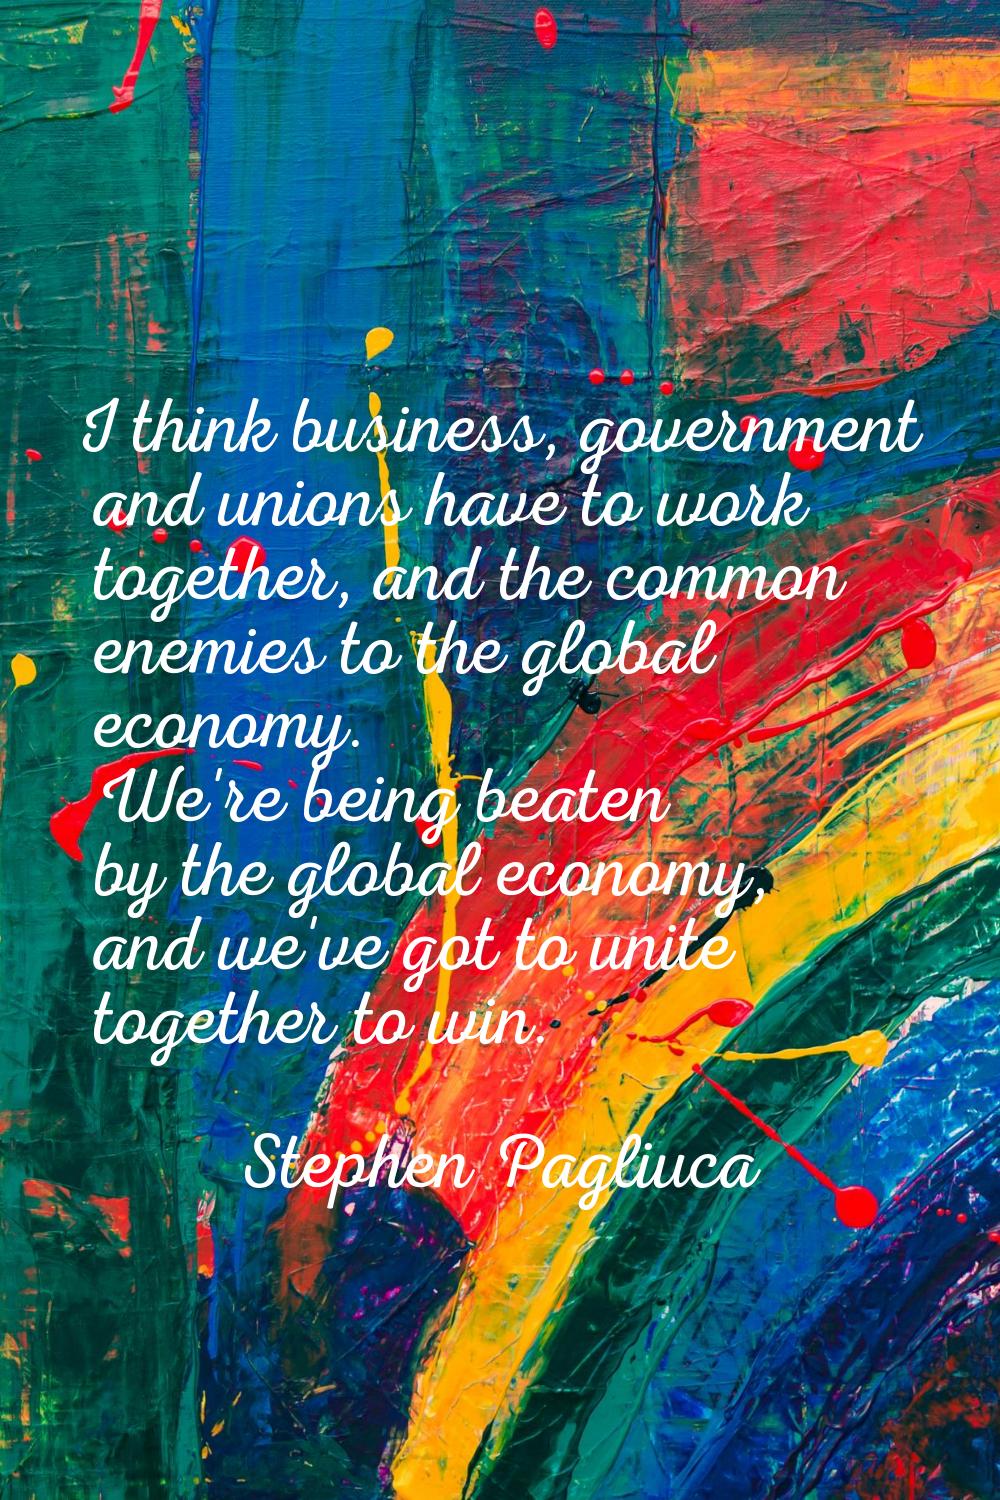 I think business, government and unions have to work together, and the common enemies to the global